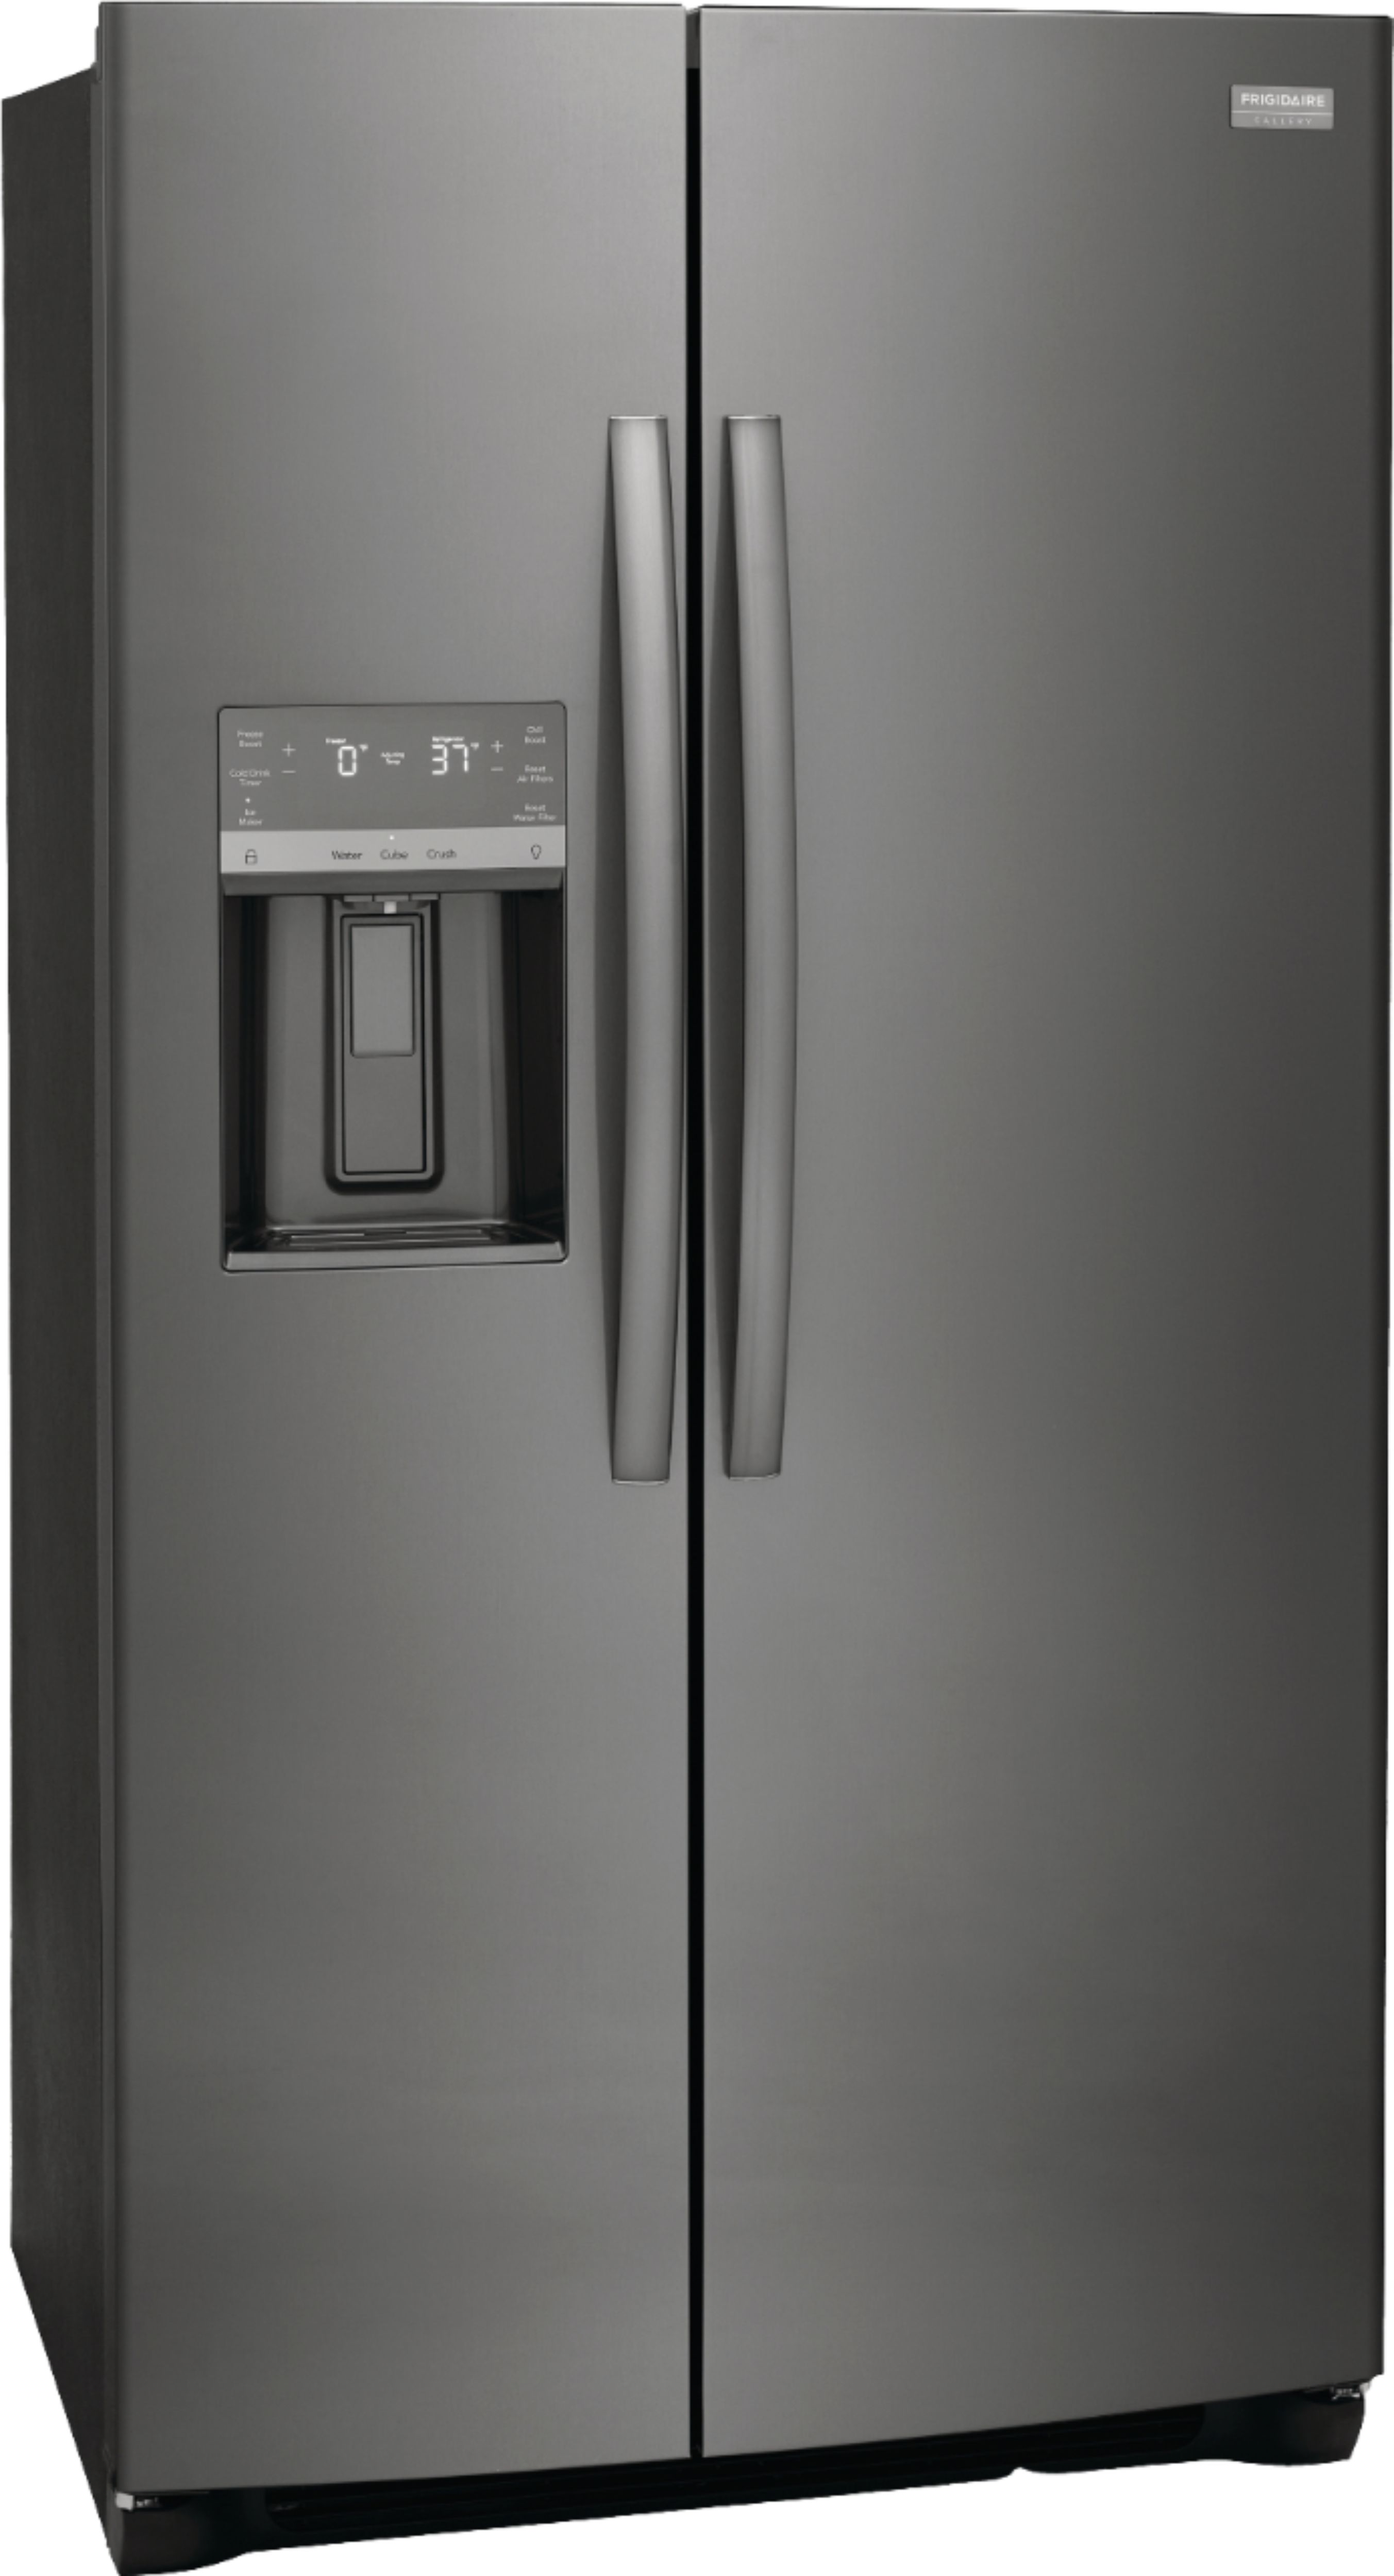 Left View: Samsung - 27.4 cu. ft. Side-by-Side Refrigerator with WiFi and Large Capacity - Stainless steel